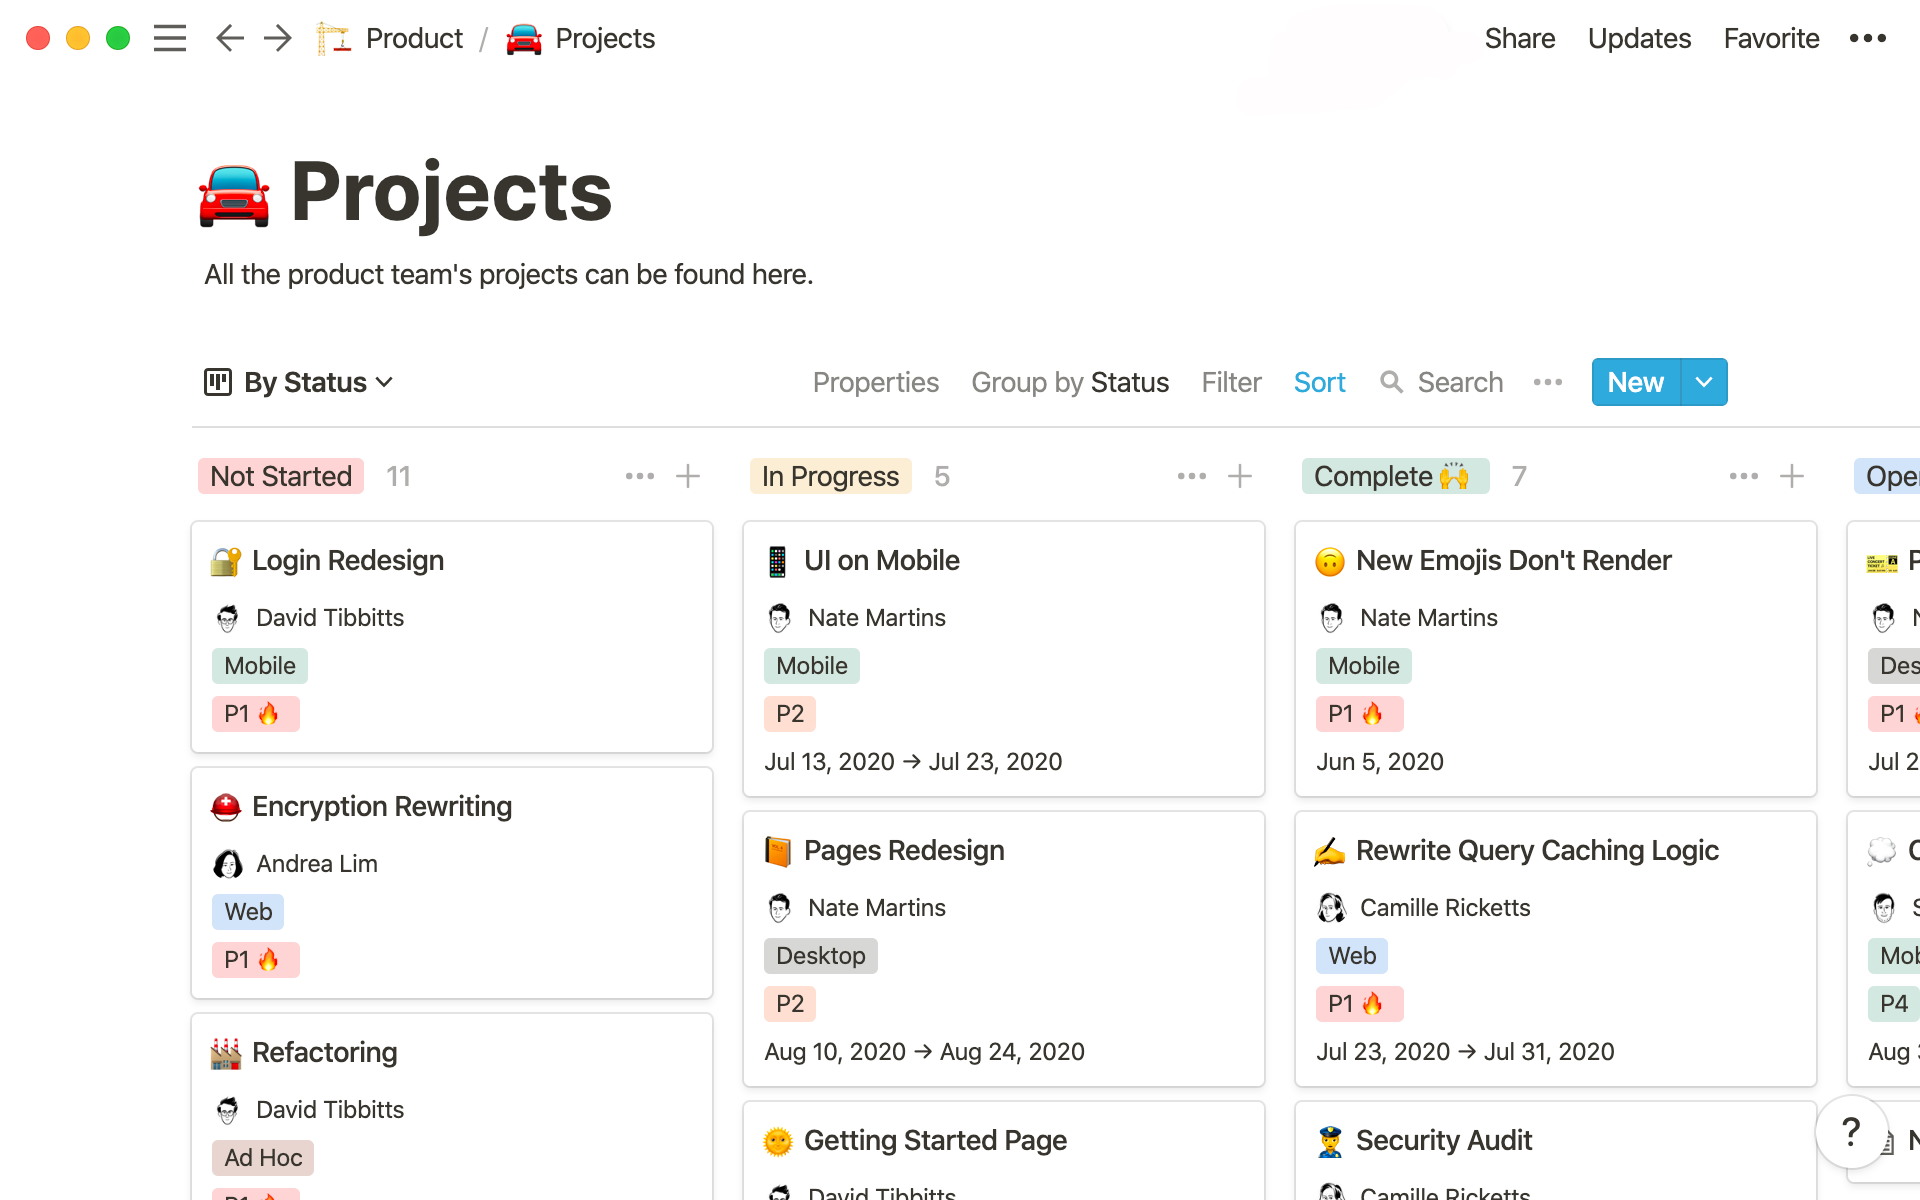 Here’s how your product team’s projects board can look. 